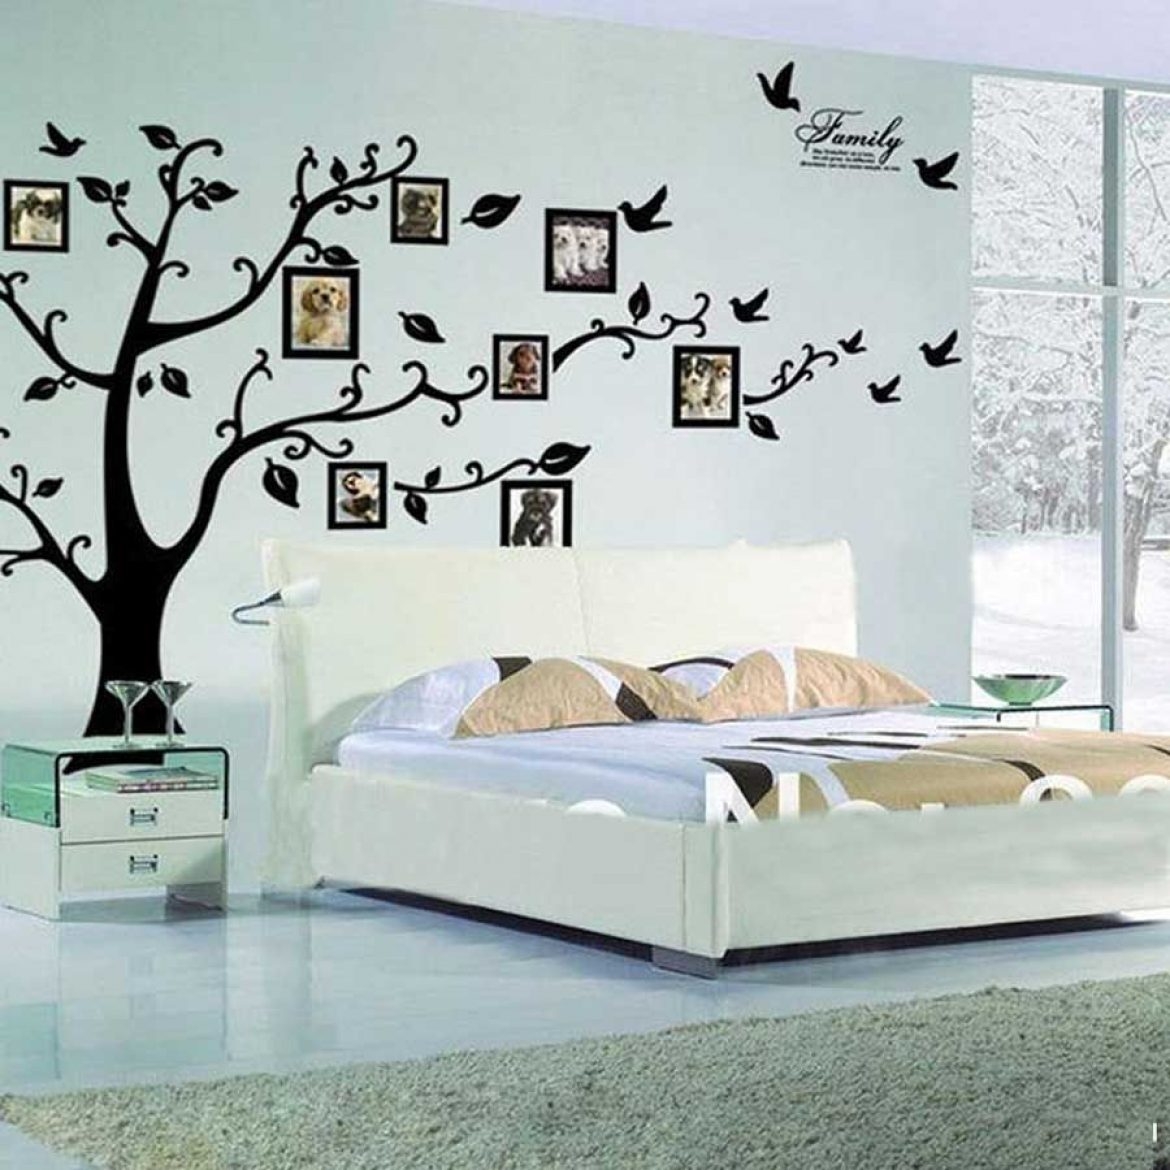 10 Pcs Picture Frames Wall Decal The Memories Vinyl Stickers Removable Photo Frame Butterflies Leaves Art DIY Sticker Mural for Bedroom Playroom Living Room Office Home Window Door Decoration